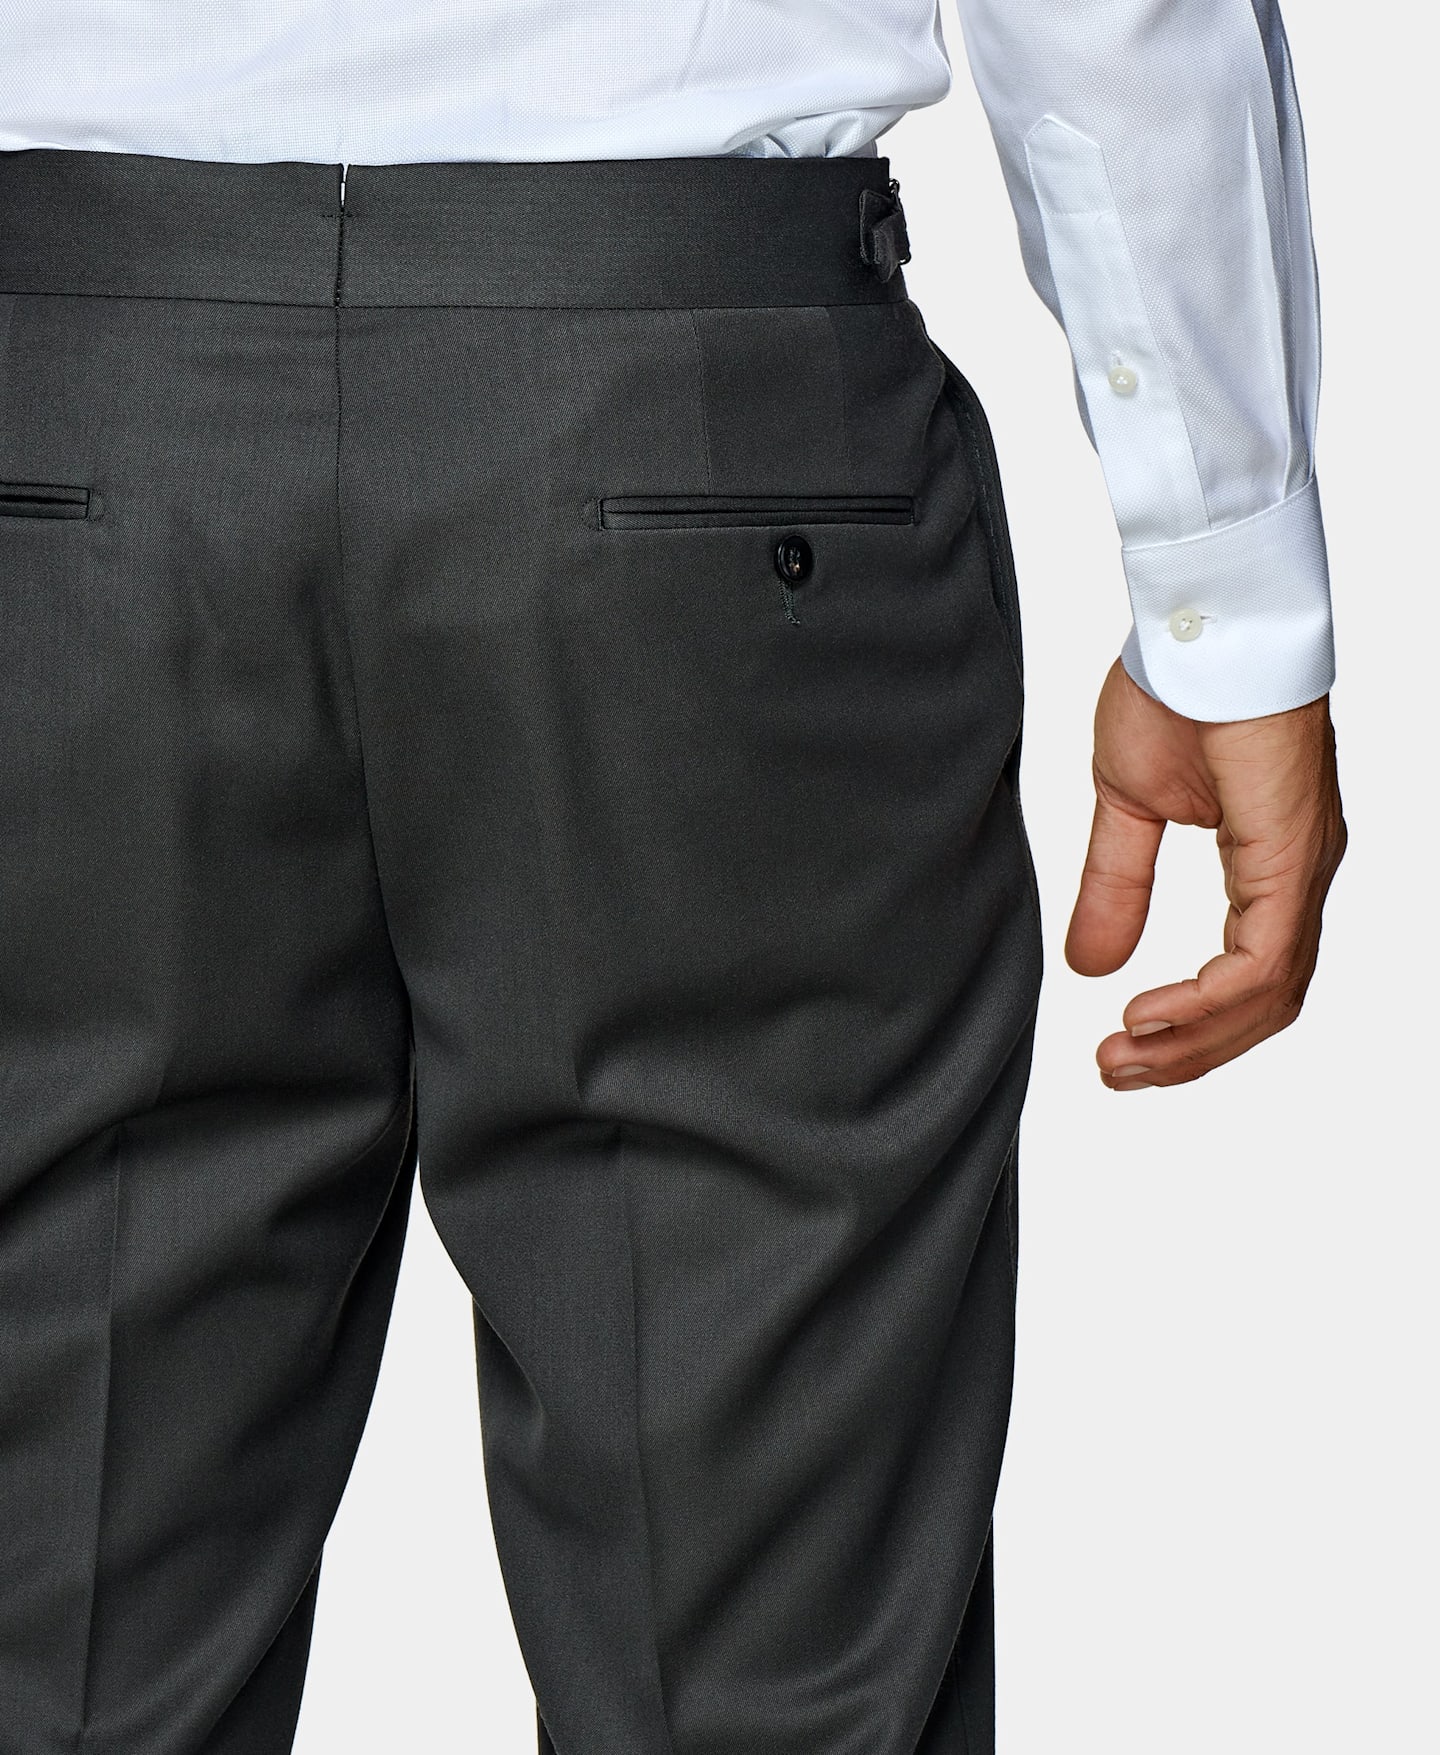 Trousers alterations